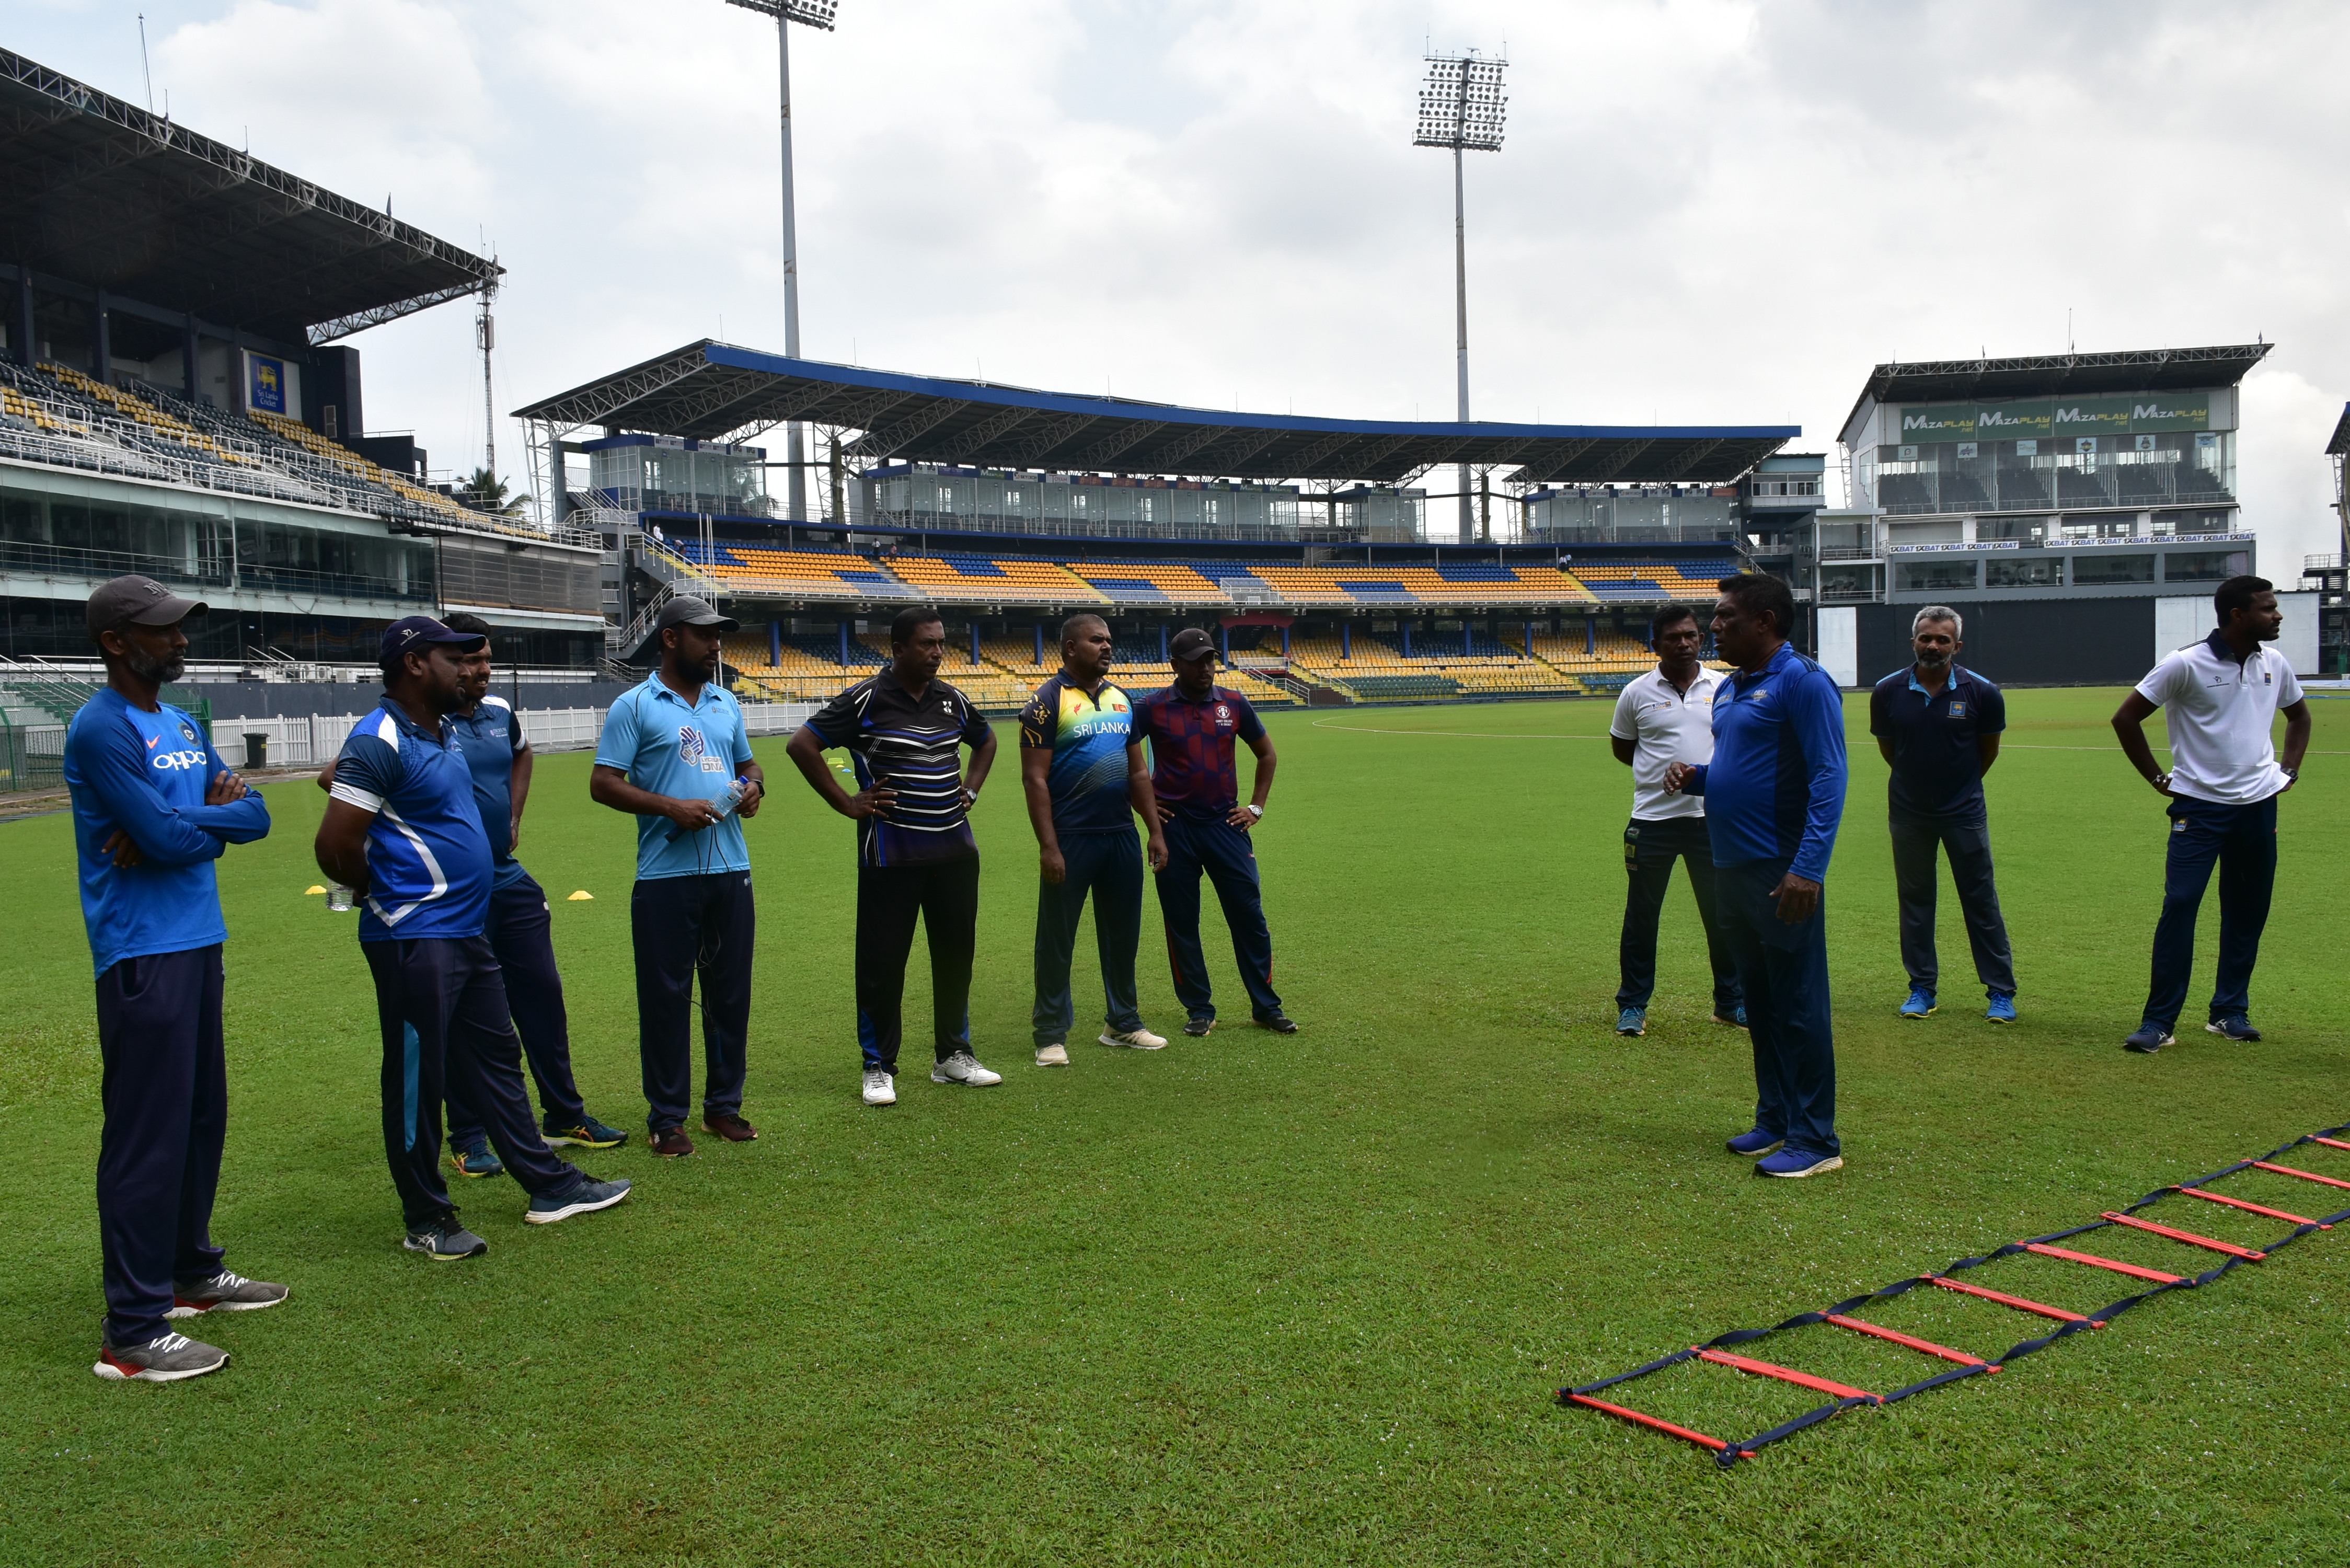 Coach Education Program for Western Province Colombo South Zone 2 School Coaches at R.Premadasa Stadium